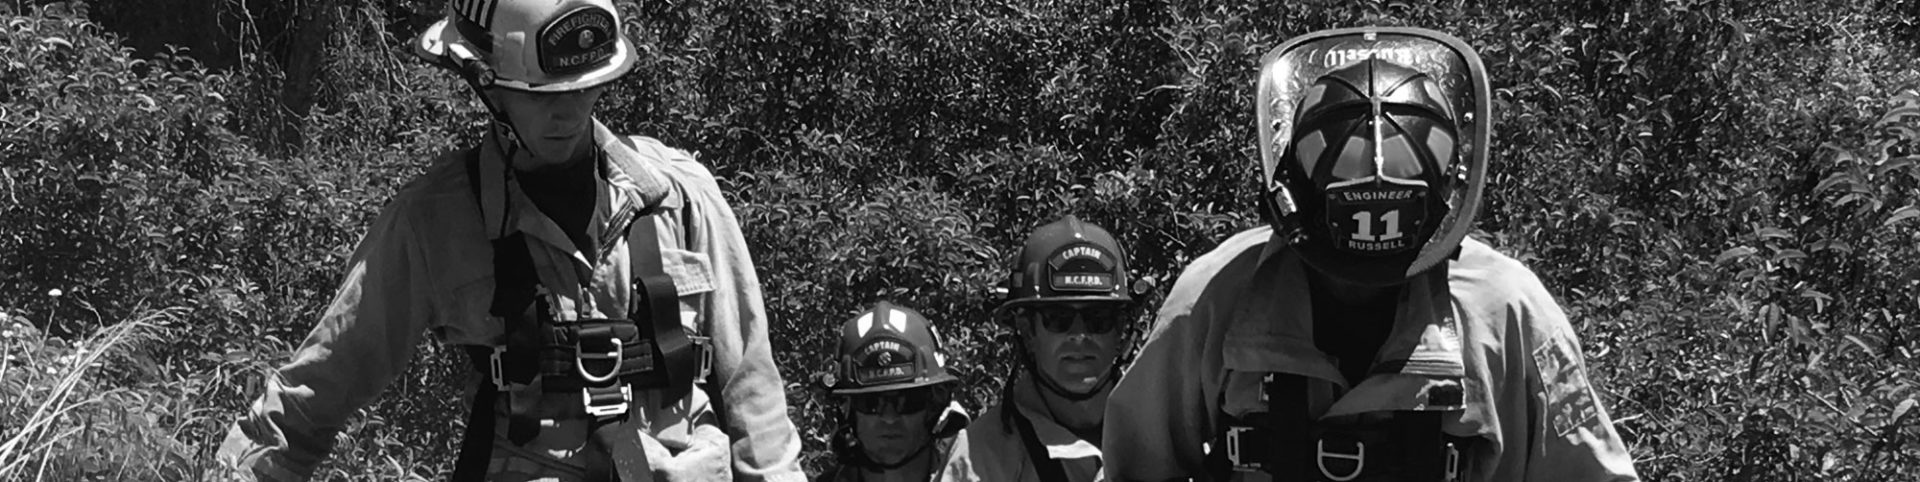 Photo of four fire fighters in bushes with helmets